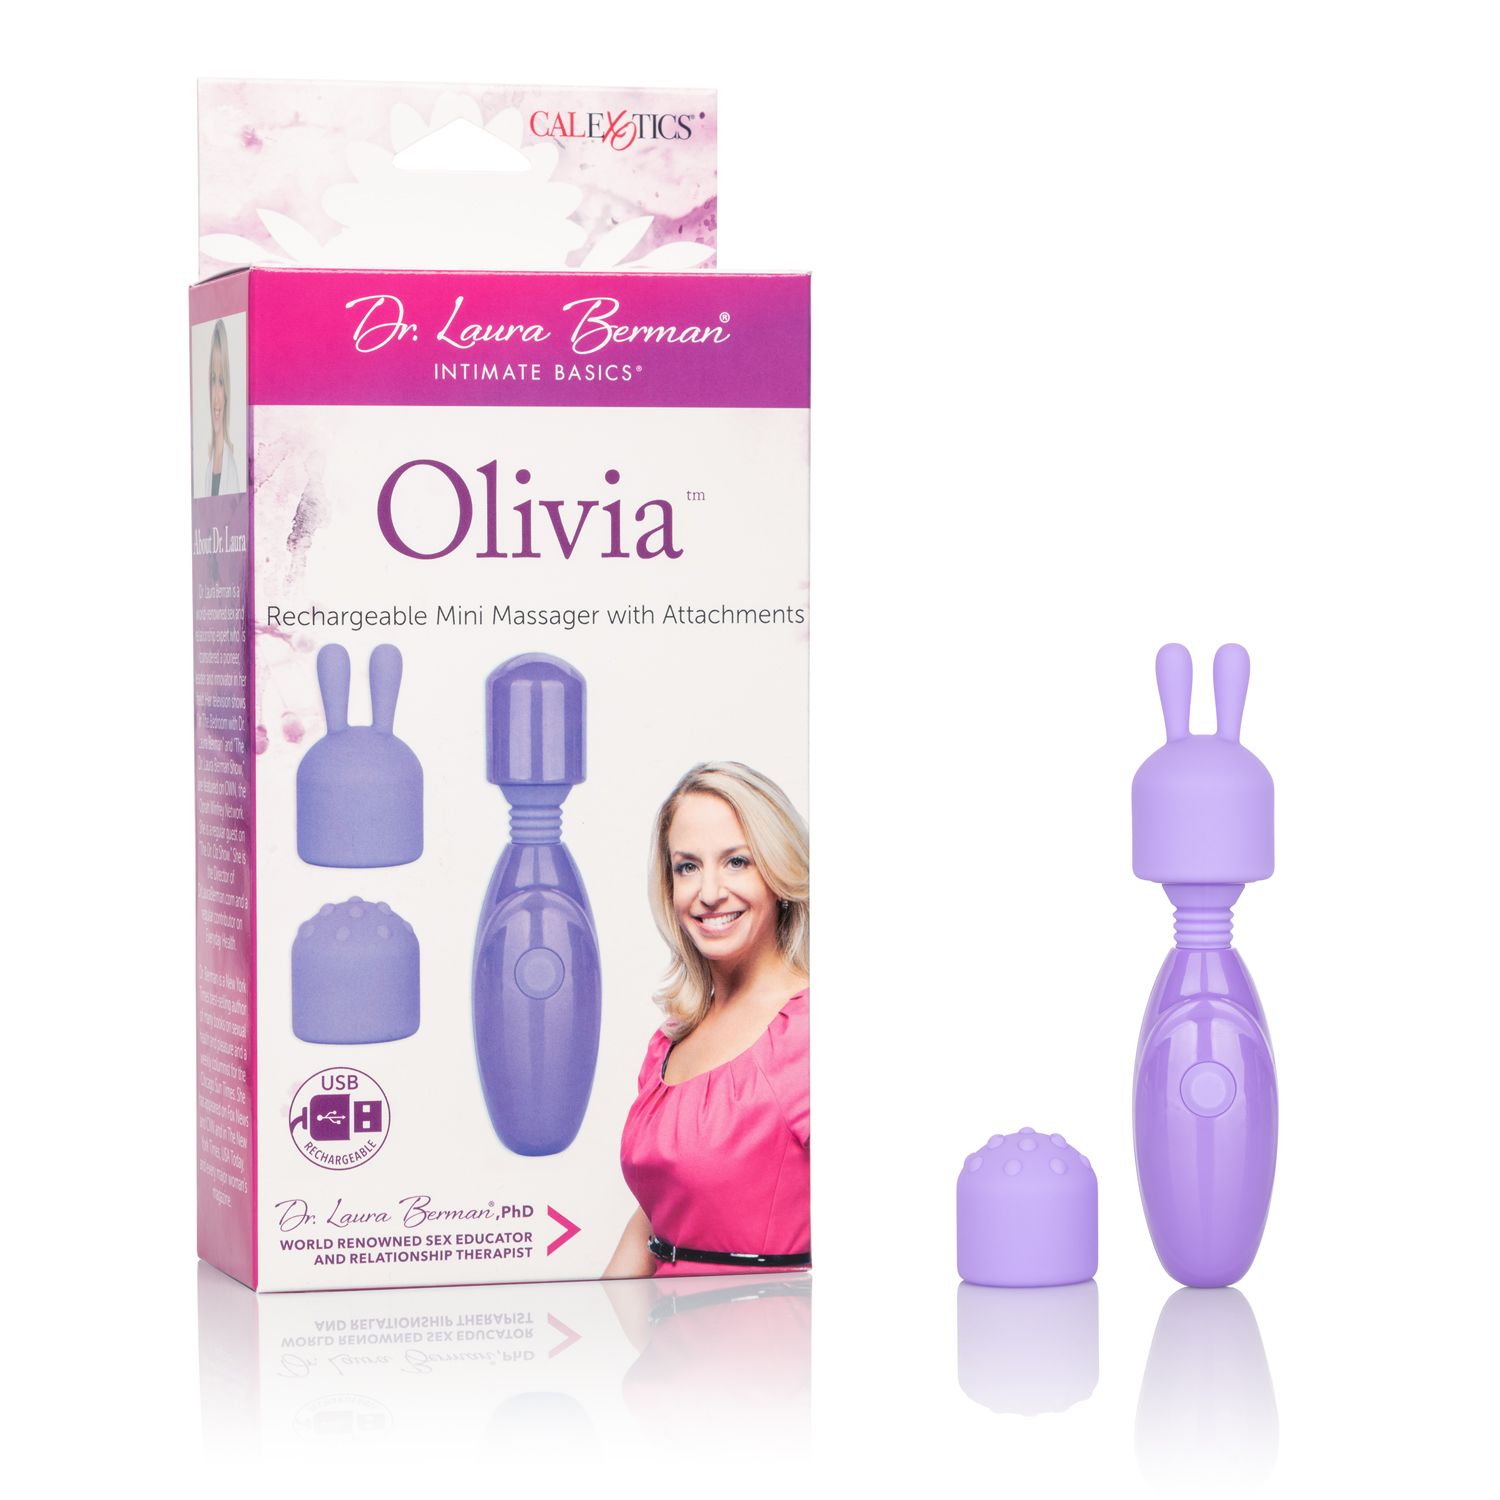 (WD) DR LAURA BERMAN OLIVIA RECHARGEABLE MINI MASSAGER W/ ATTACHMENTS